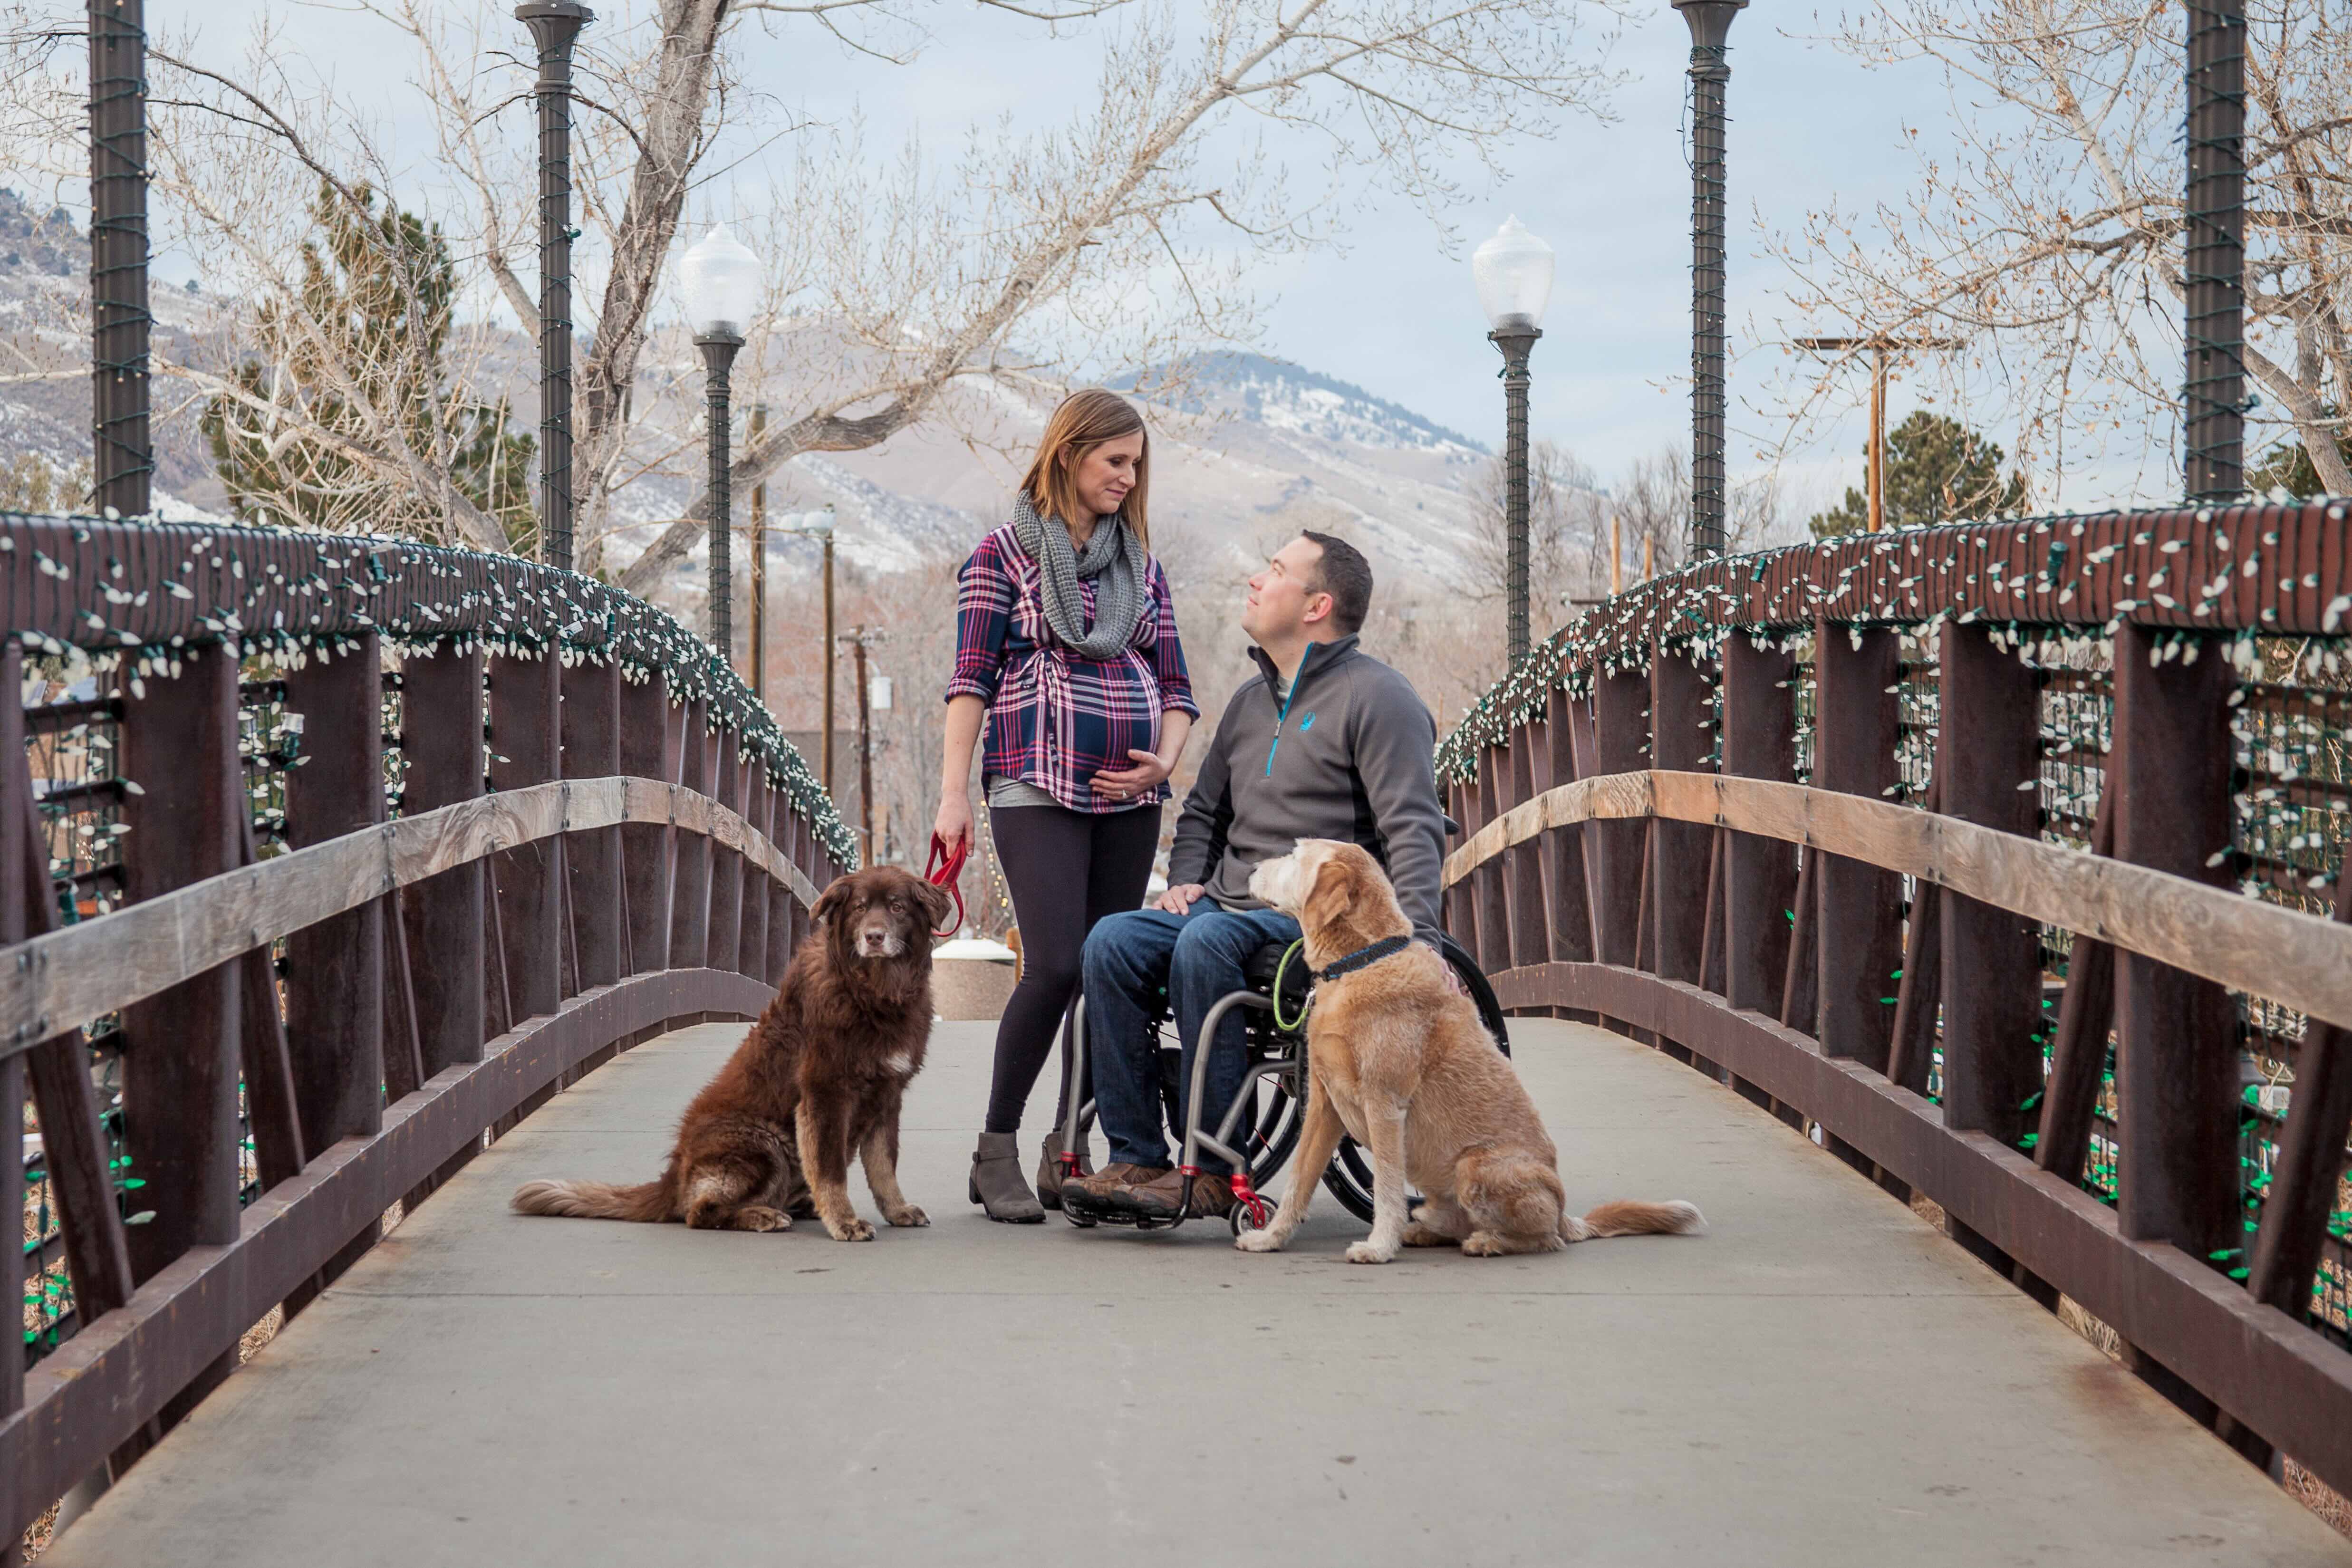 On a wooden bridge, a man in a wheelchair looks at a smiling pregnant woman standing next to him. Next to each one, there is a dog.